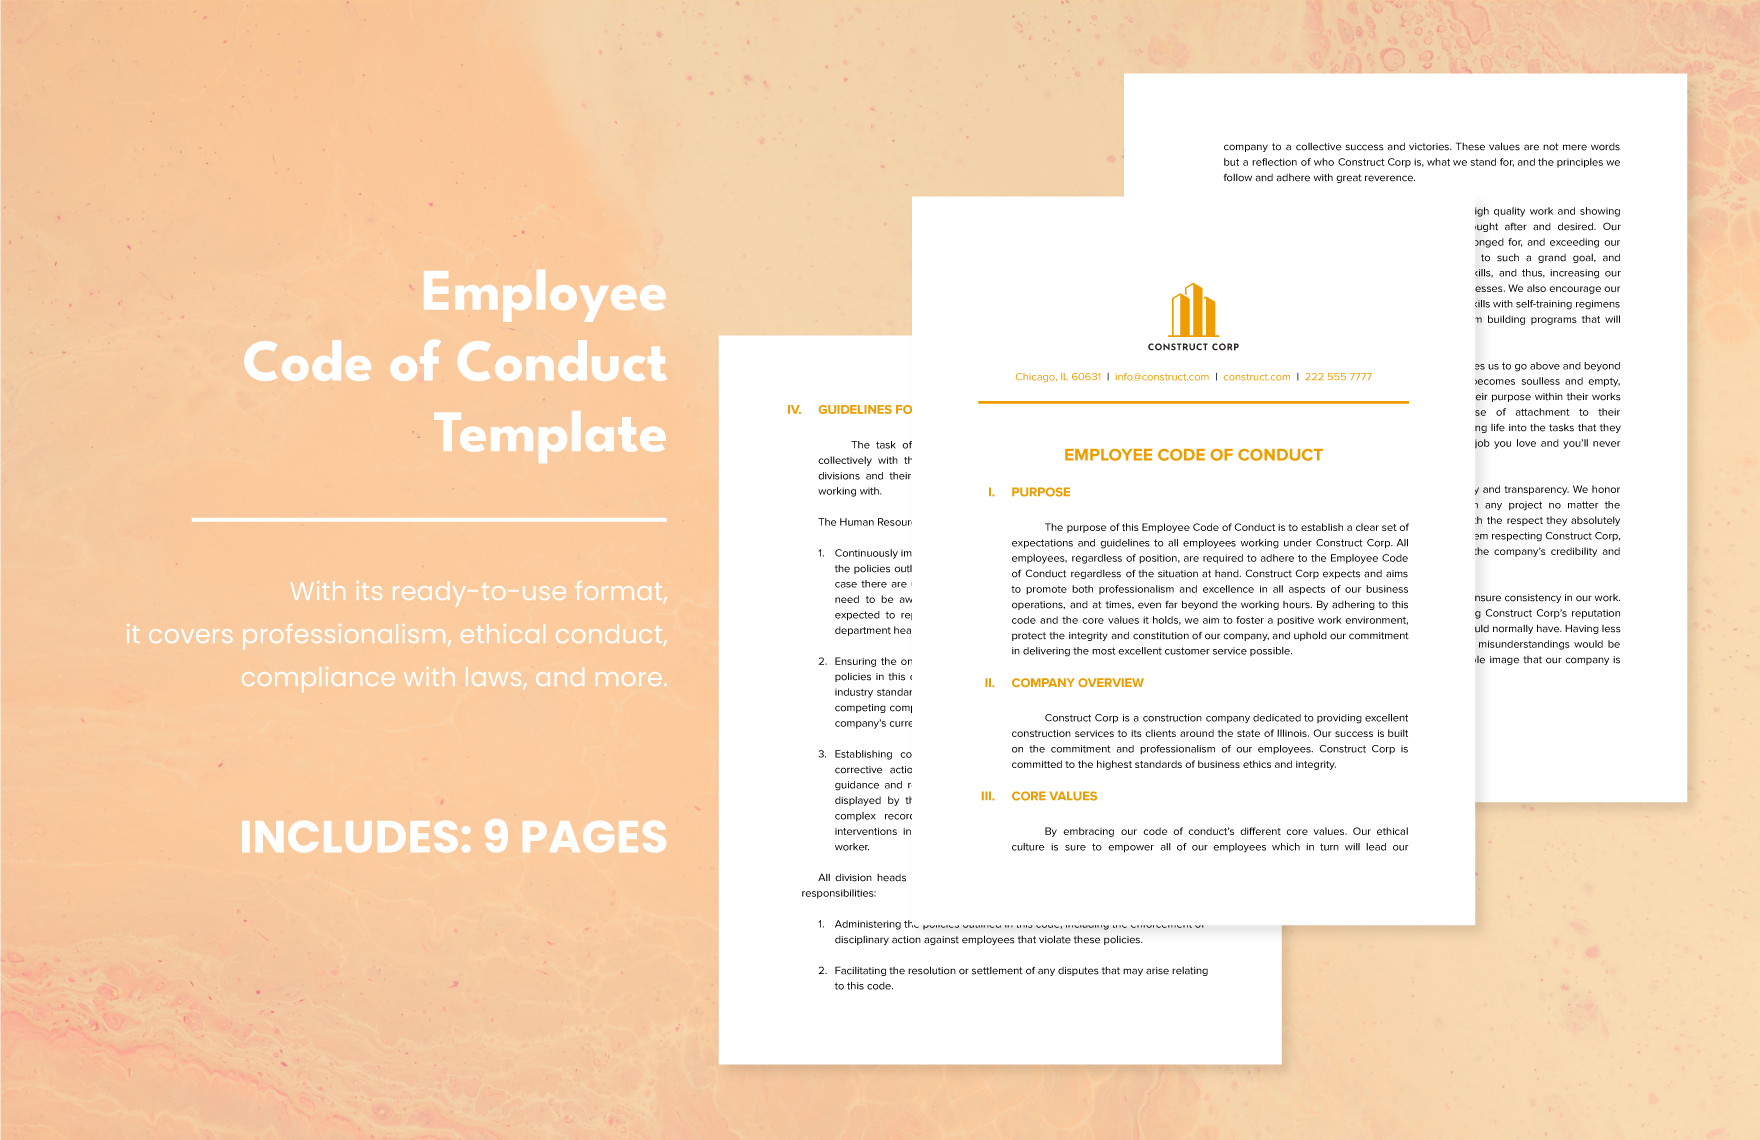 Employee Code of Conduct Template